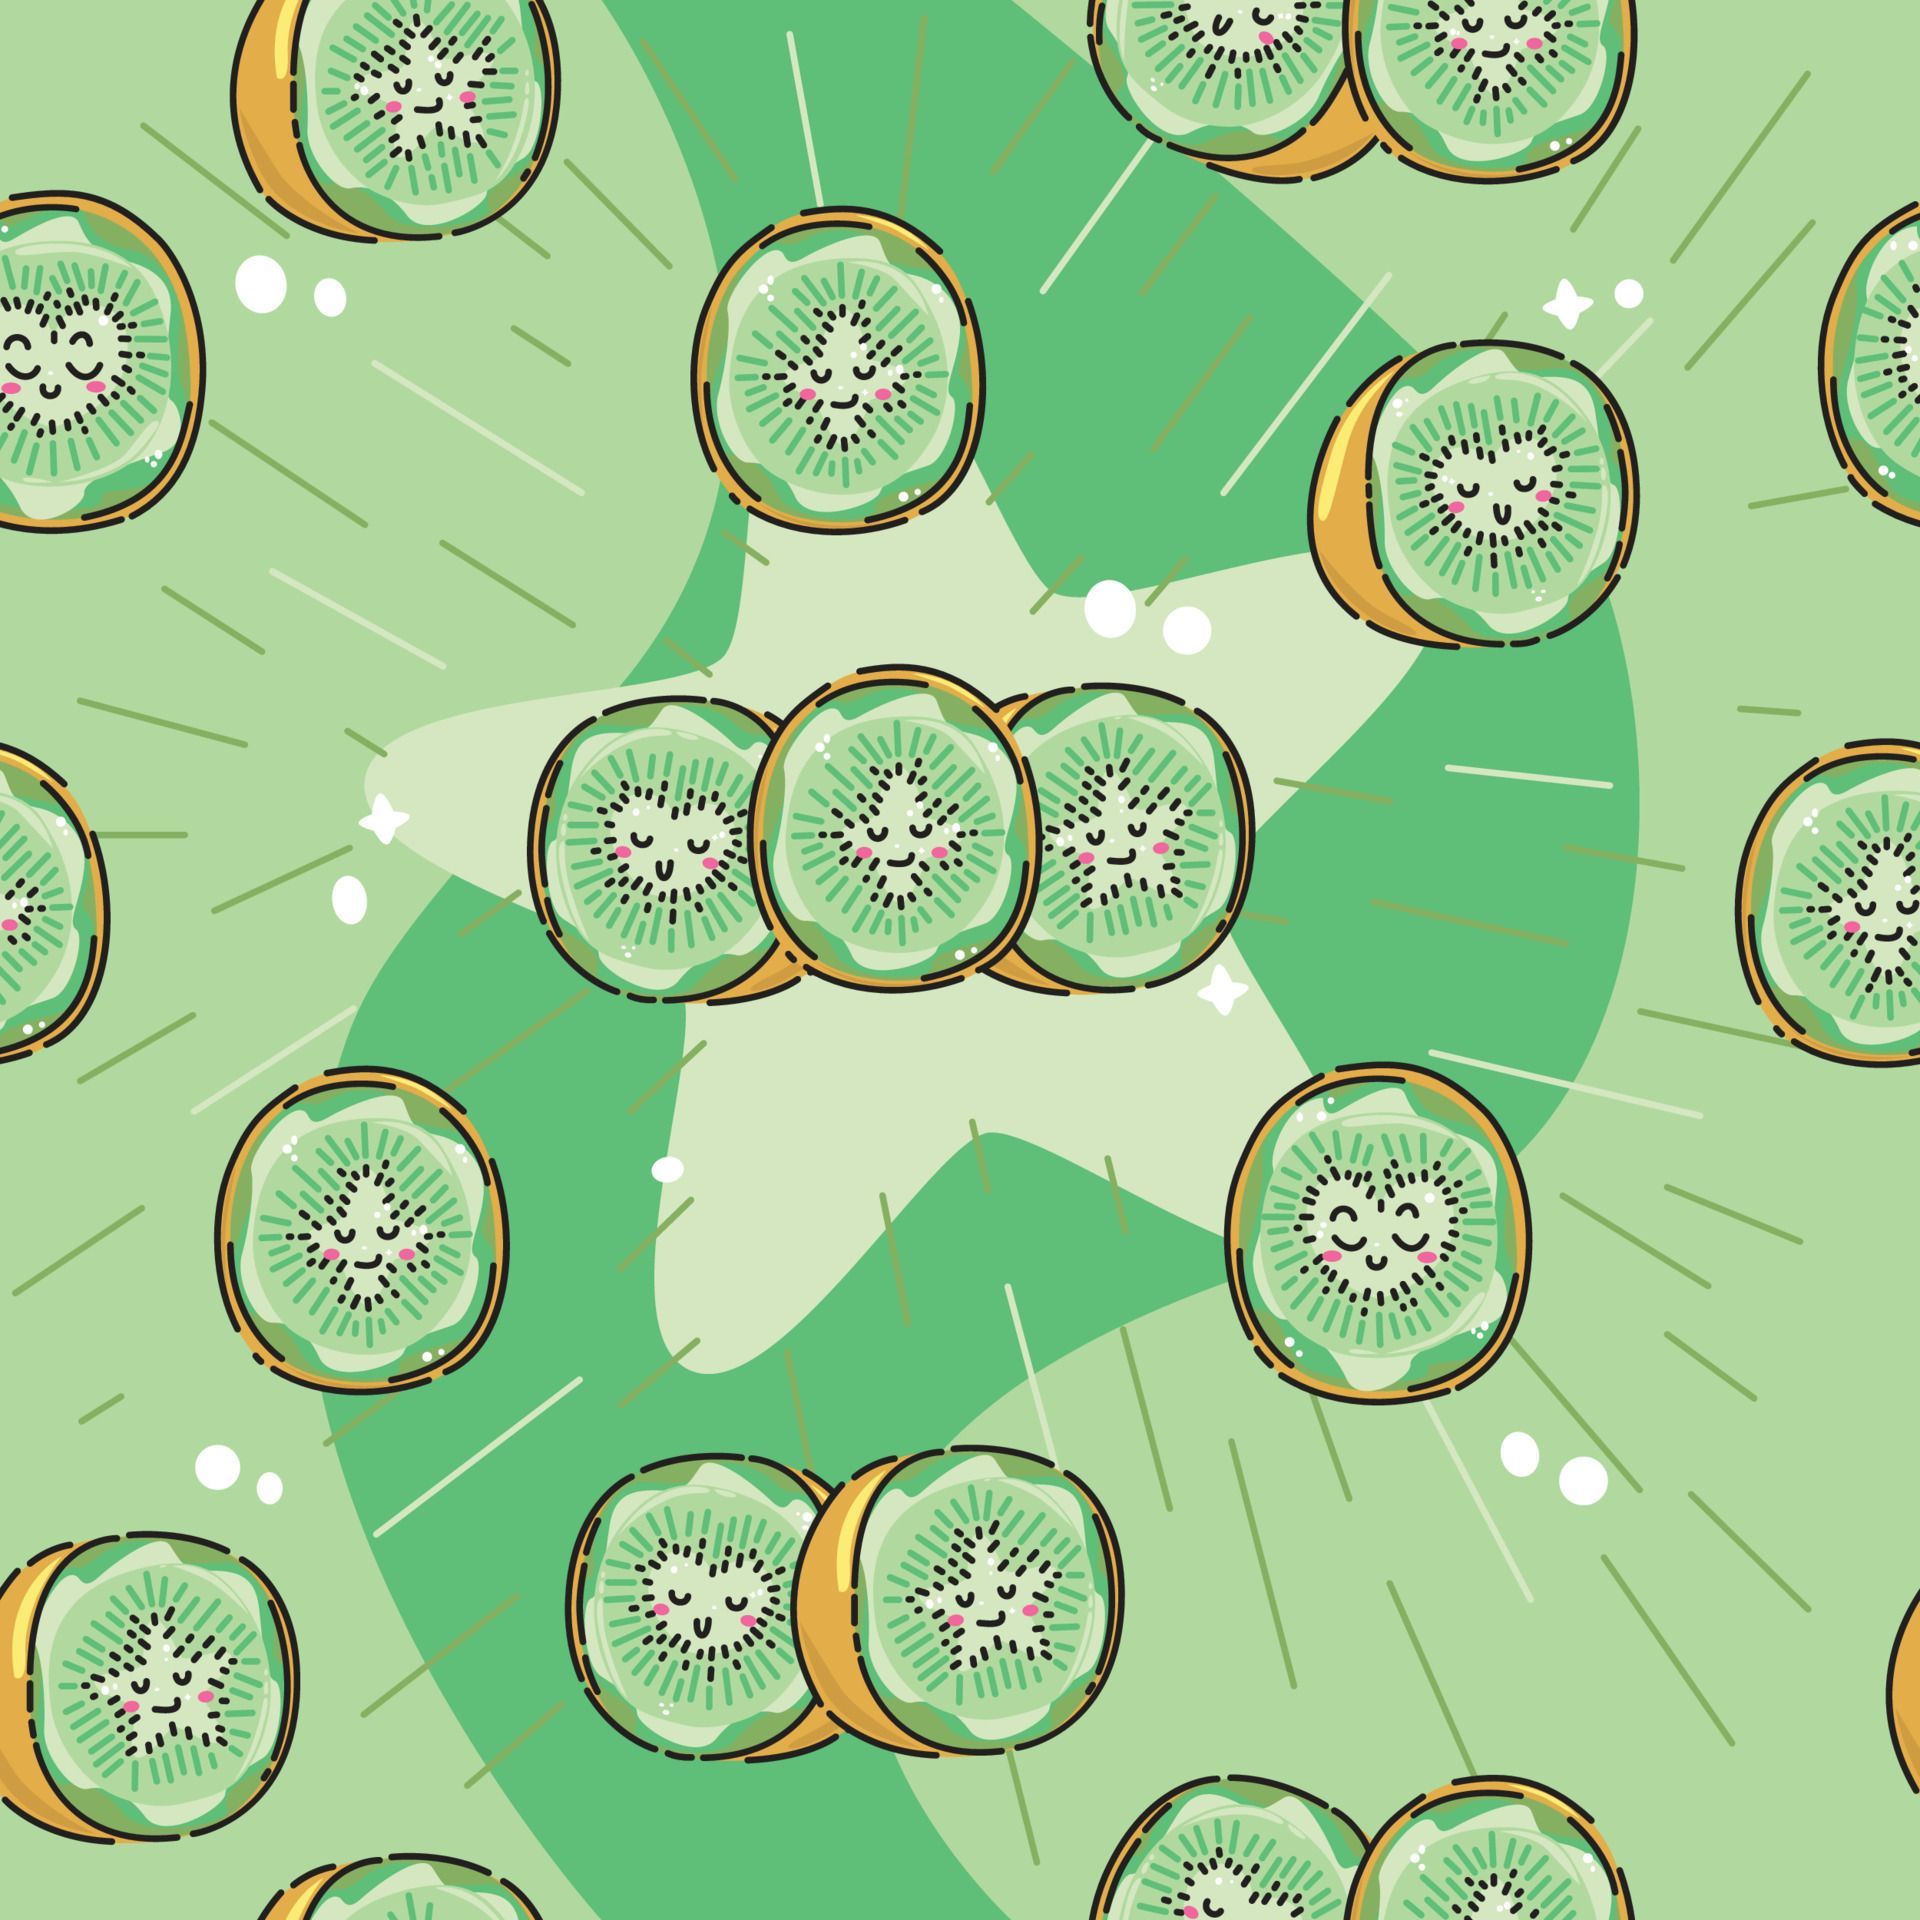 Cute, Green Kawaii Anthropomorphic Cartoon Kiwi Seamless Pattern With A Wavy Starburst Background. Great For Spring Or Summer Fabric, Scrap Booking, Gift Wrap, Wallpaper, Product Design. Vector